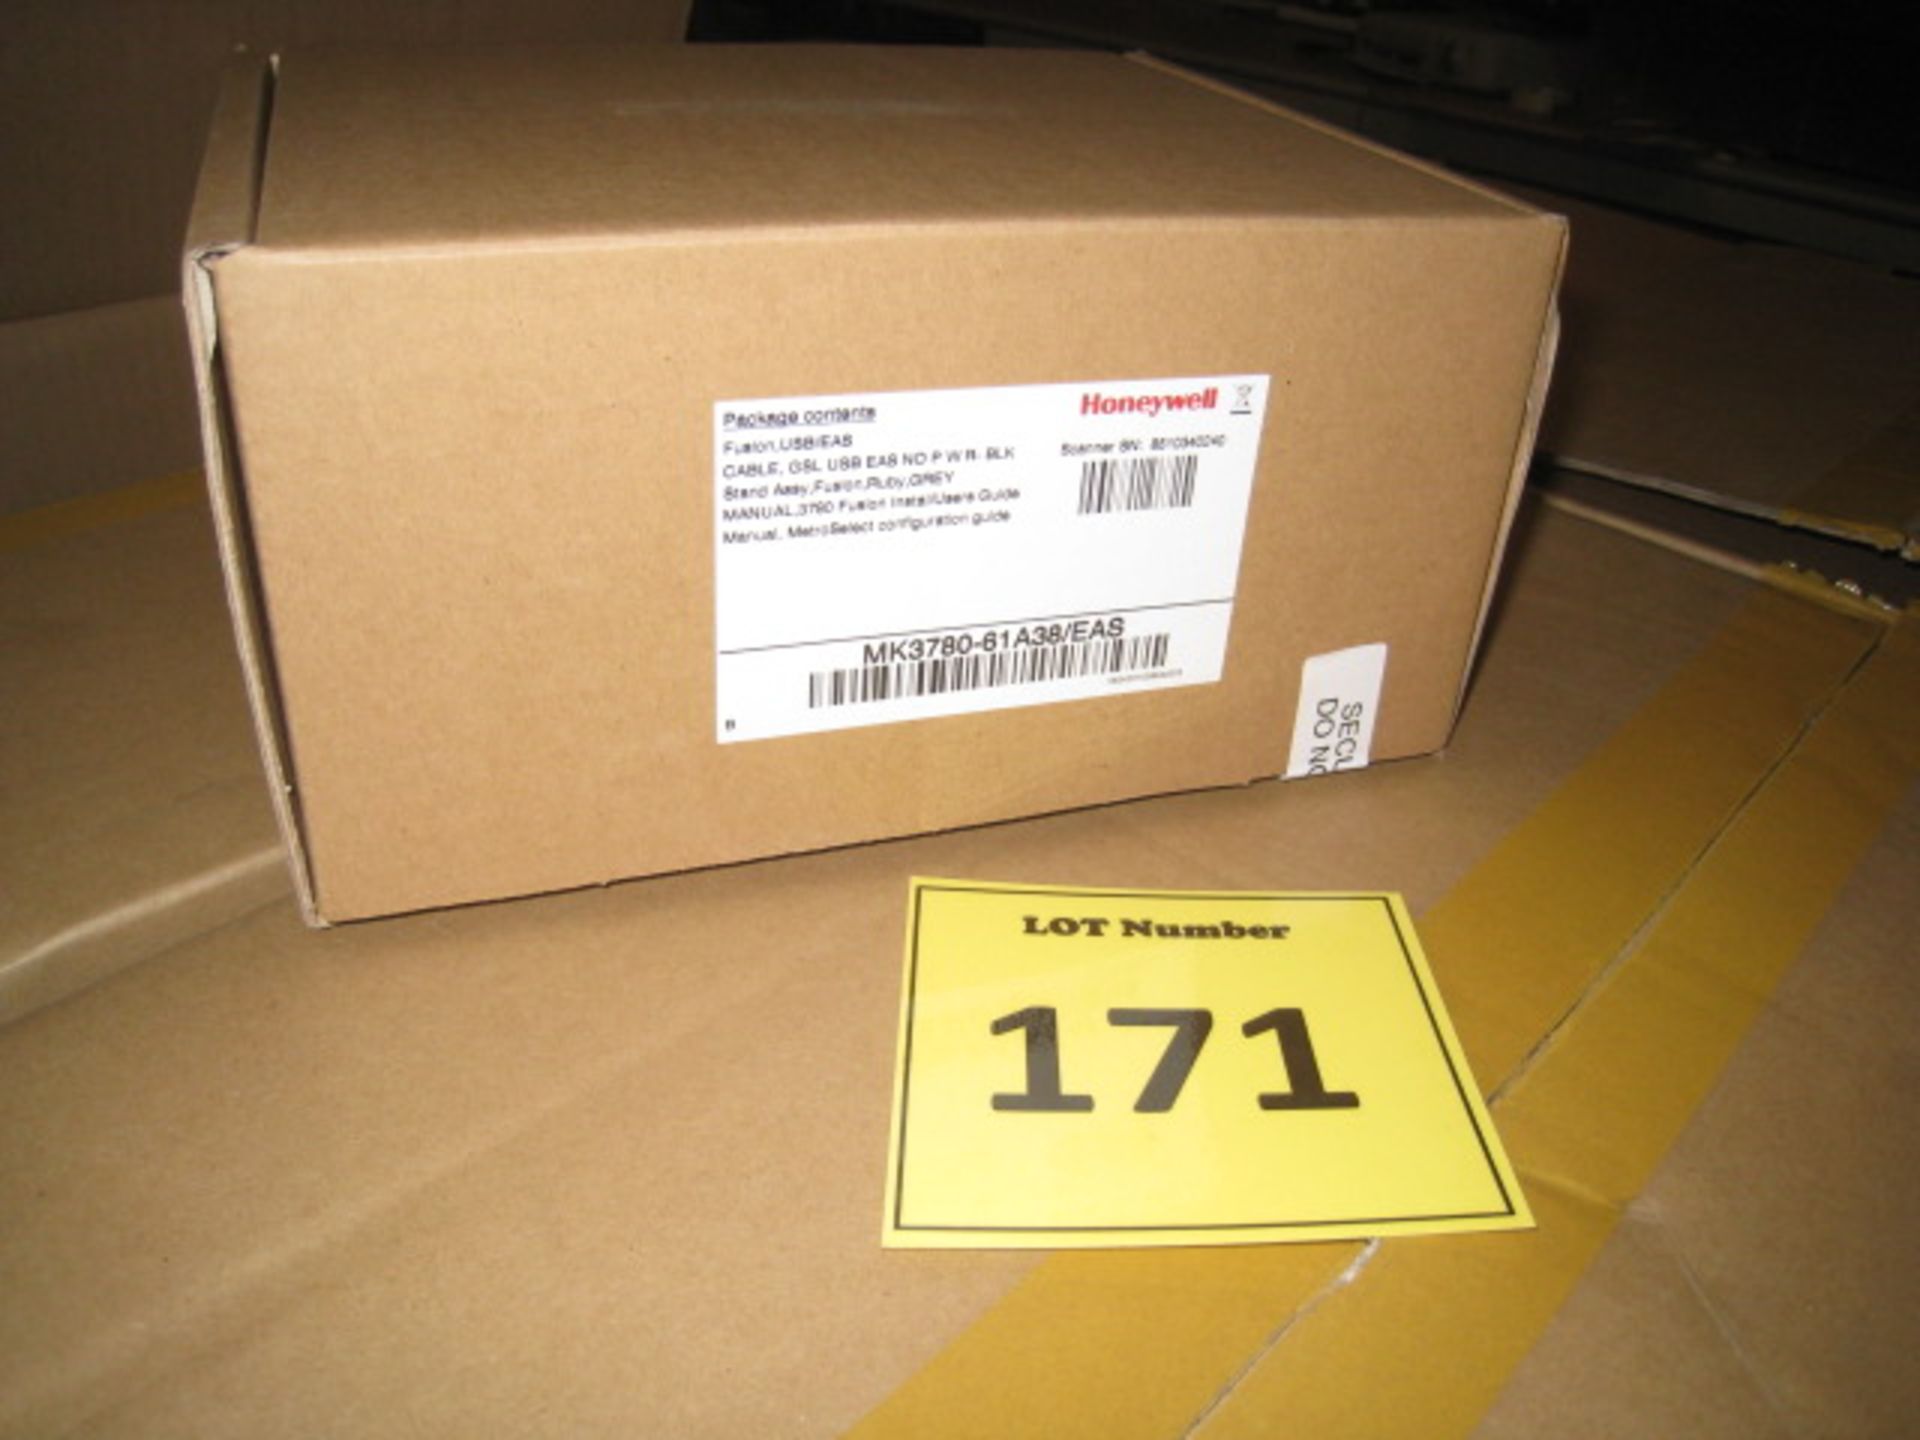 HONEYWELL MK3780-61A38/EAS BARCODE SCANNER NEW IN SEALED BOX. More info at: http://www.ebay.co.uk/